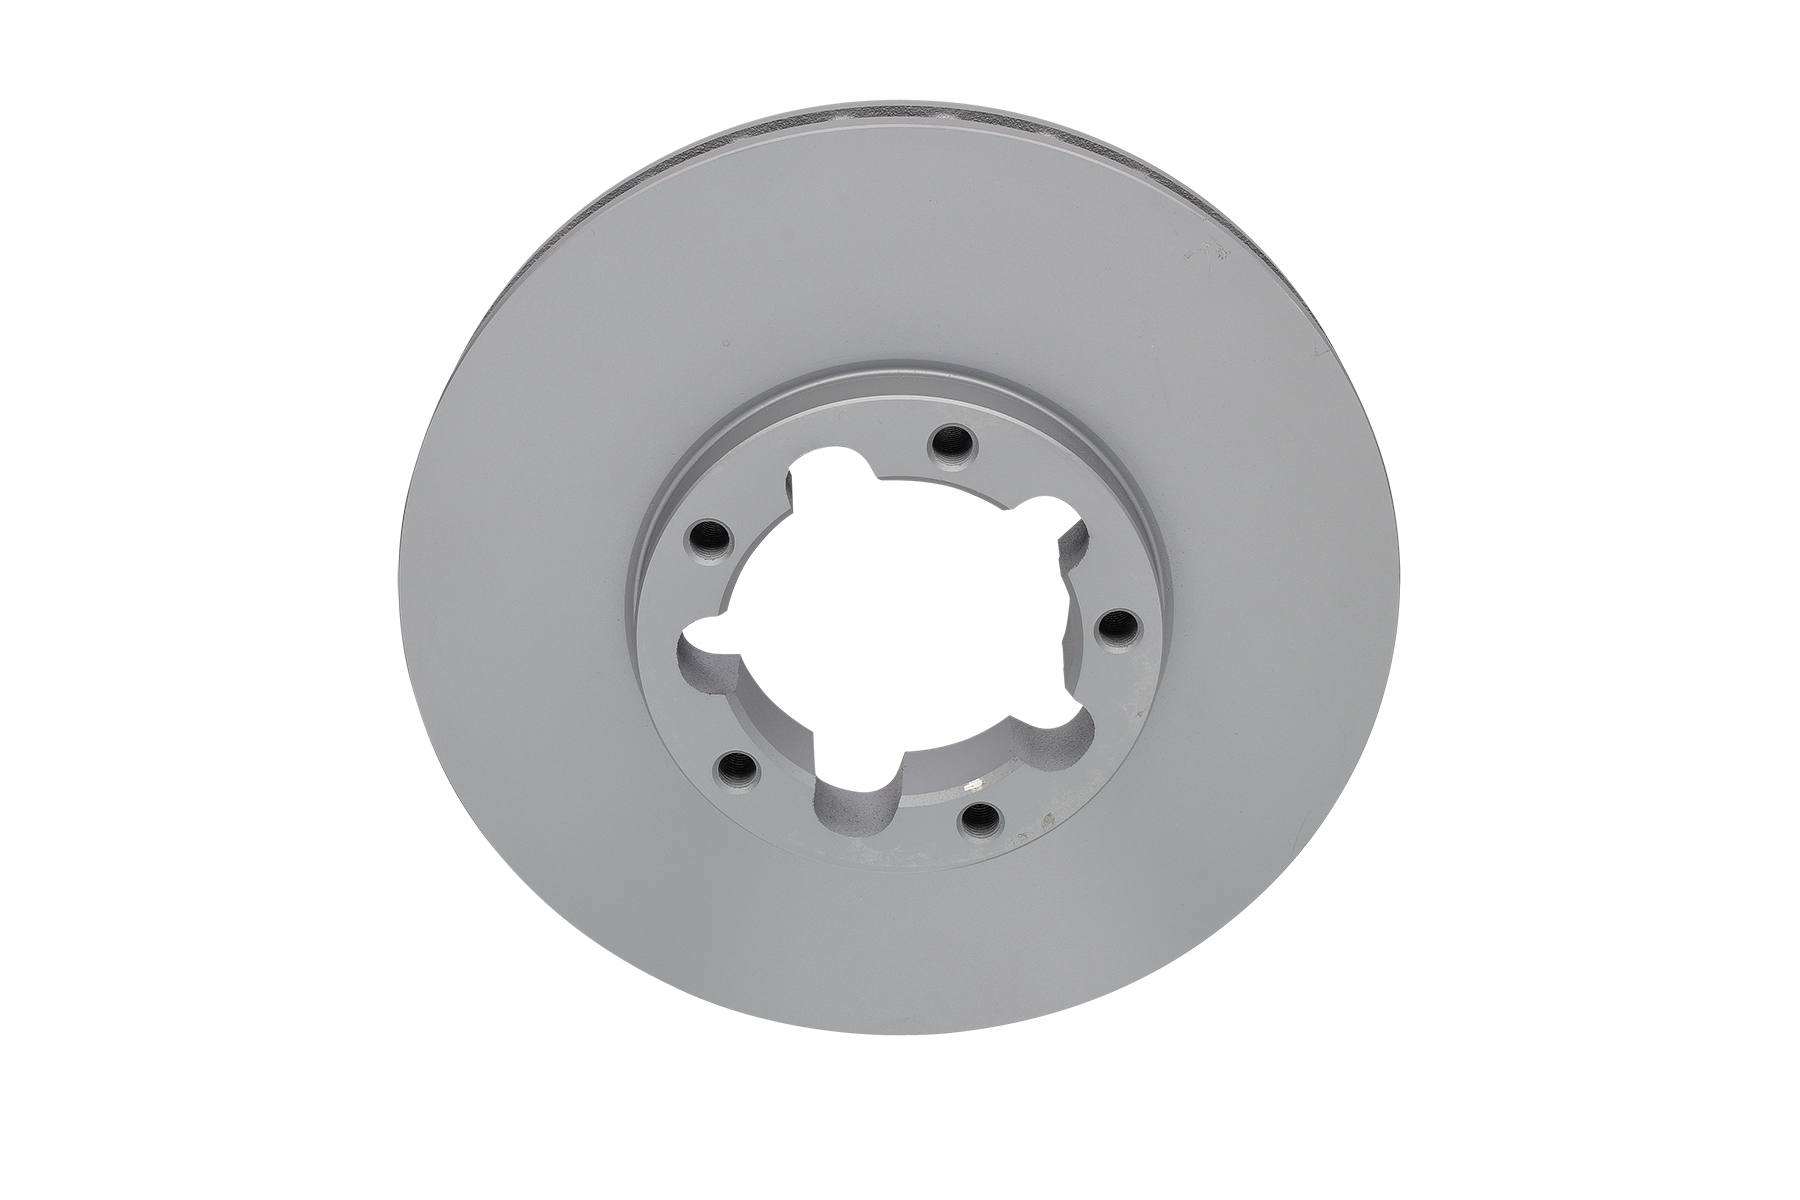 ATE 24.0128-0244.1 Brake disc 276,0x28,0mm, 5x118,0, Vented, Coated, Alloyed/High-carbon